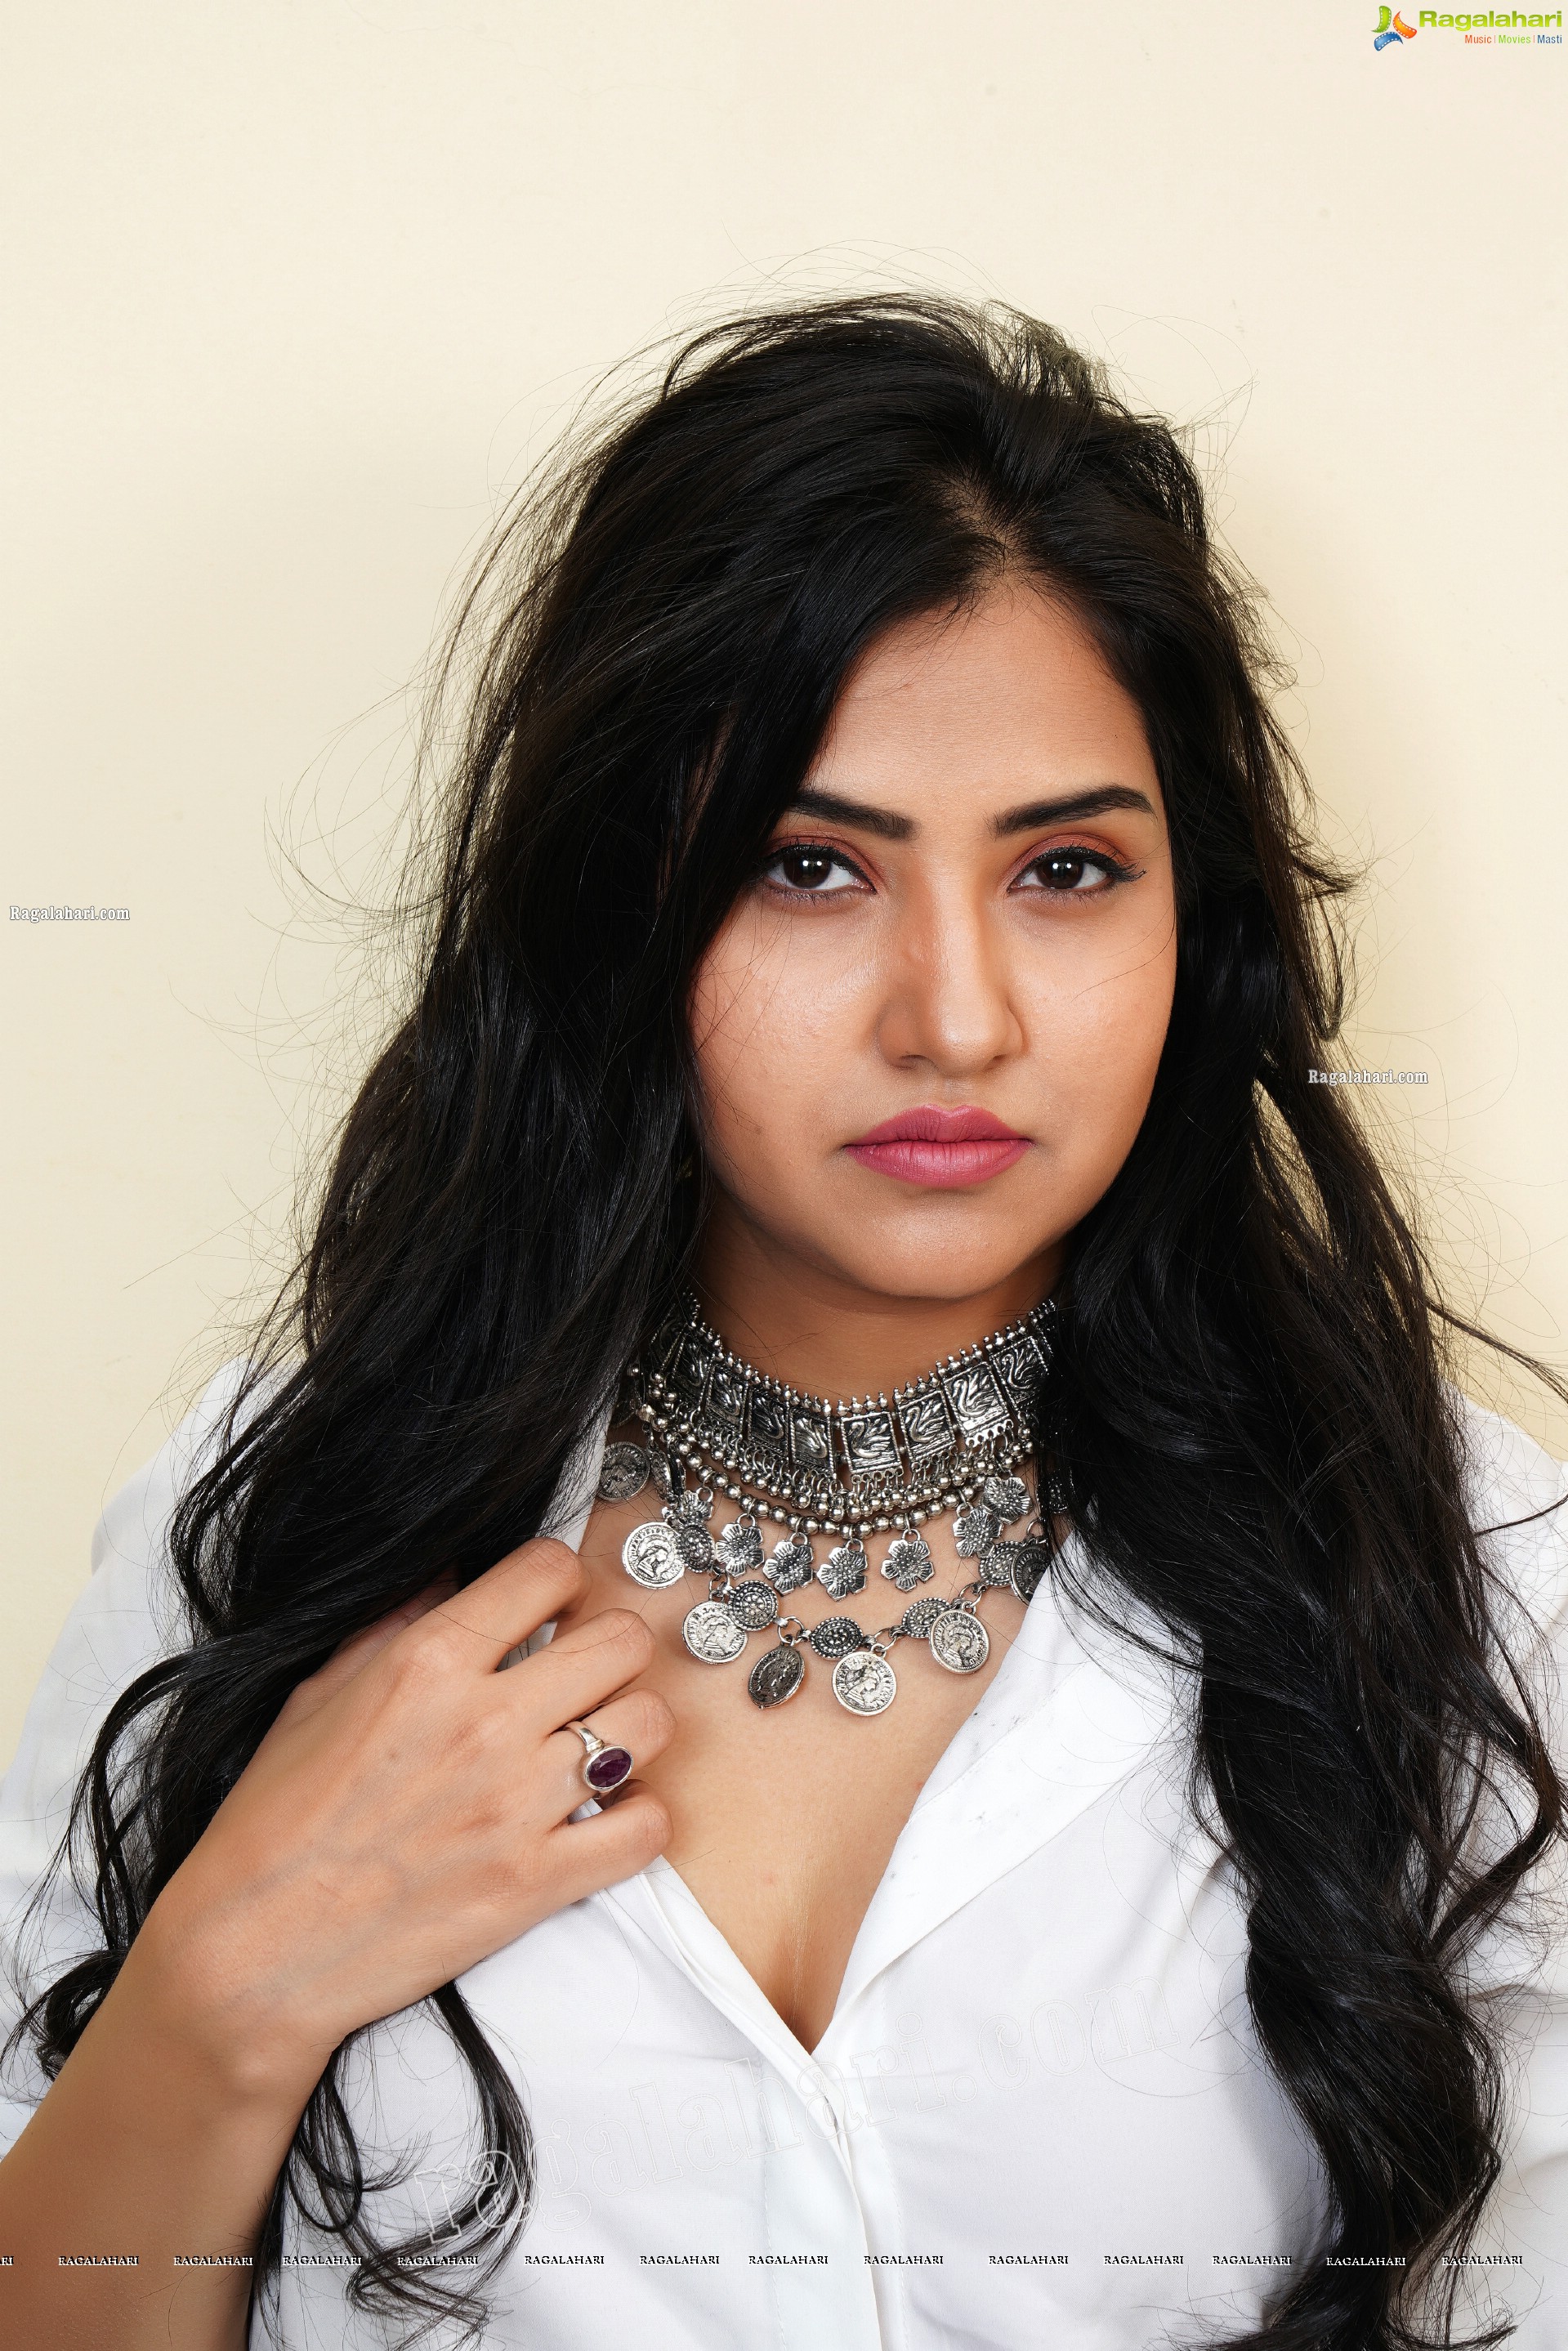 Palak Gangele in White Shirt and Jeans, Exclusive Photoshoot